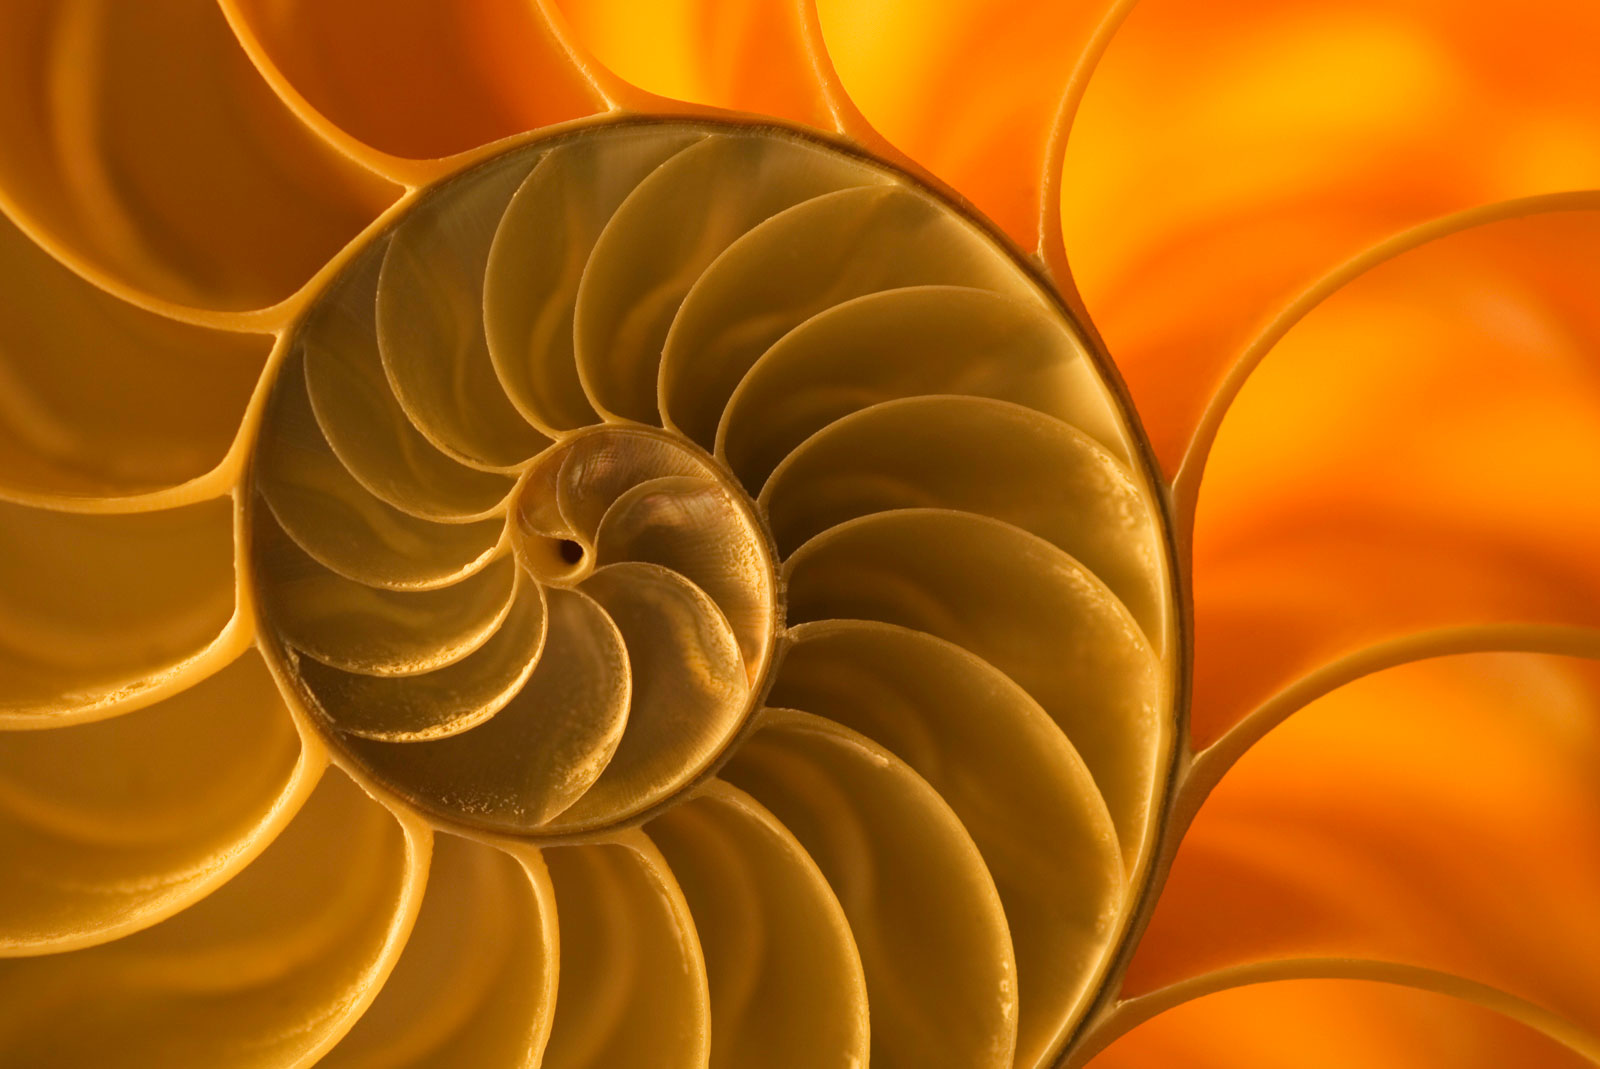 Nautilus shell, South Pacific Ocean